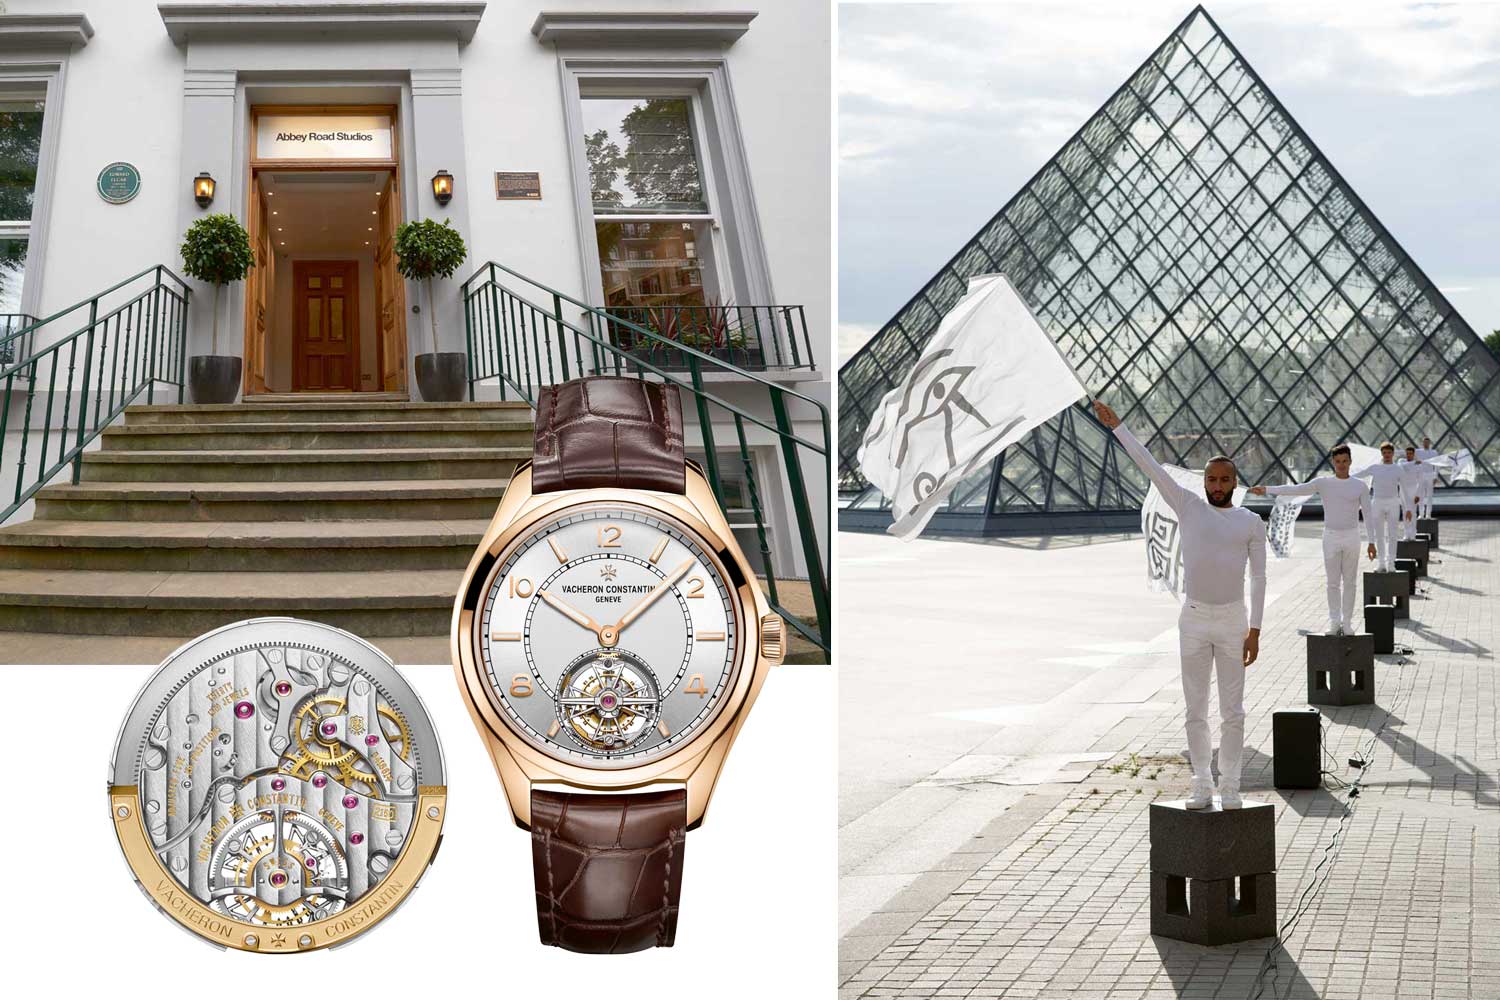 Vacheron celebrated two important partnerships recently: first with Abbey Road Studios (top left), which hosted the launch of the brand’s Fiftysix Tourbillon (above), and second, with the Louvre Museum (above right), which saw the presentation of the Métiers d'Art Tribute to Great Civilizations